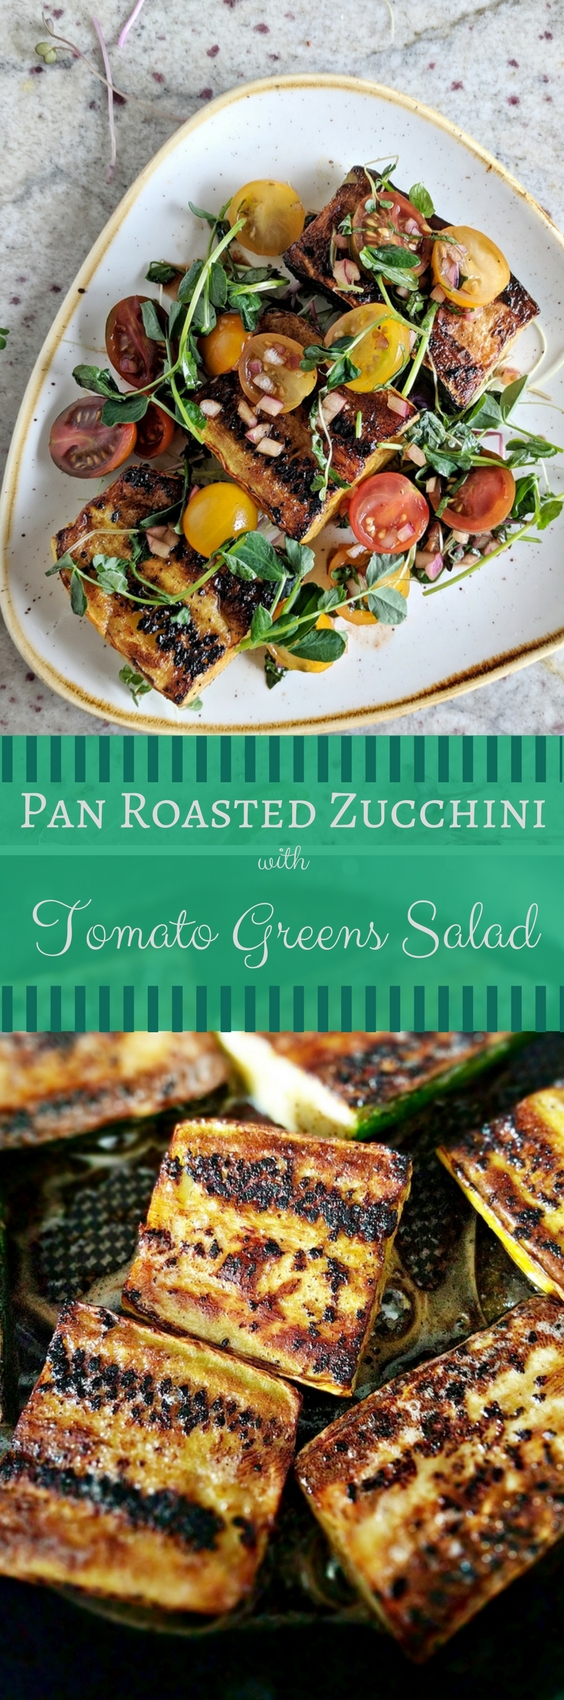 Pan Roasted Zucchini with Tomato Salad